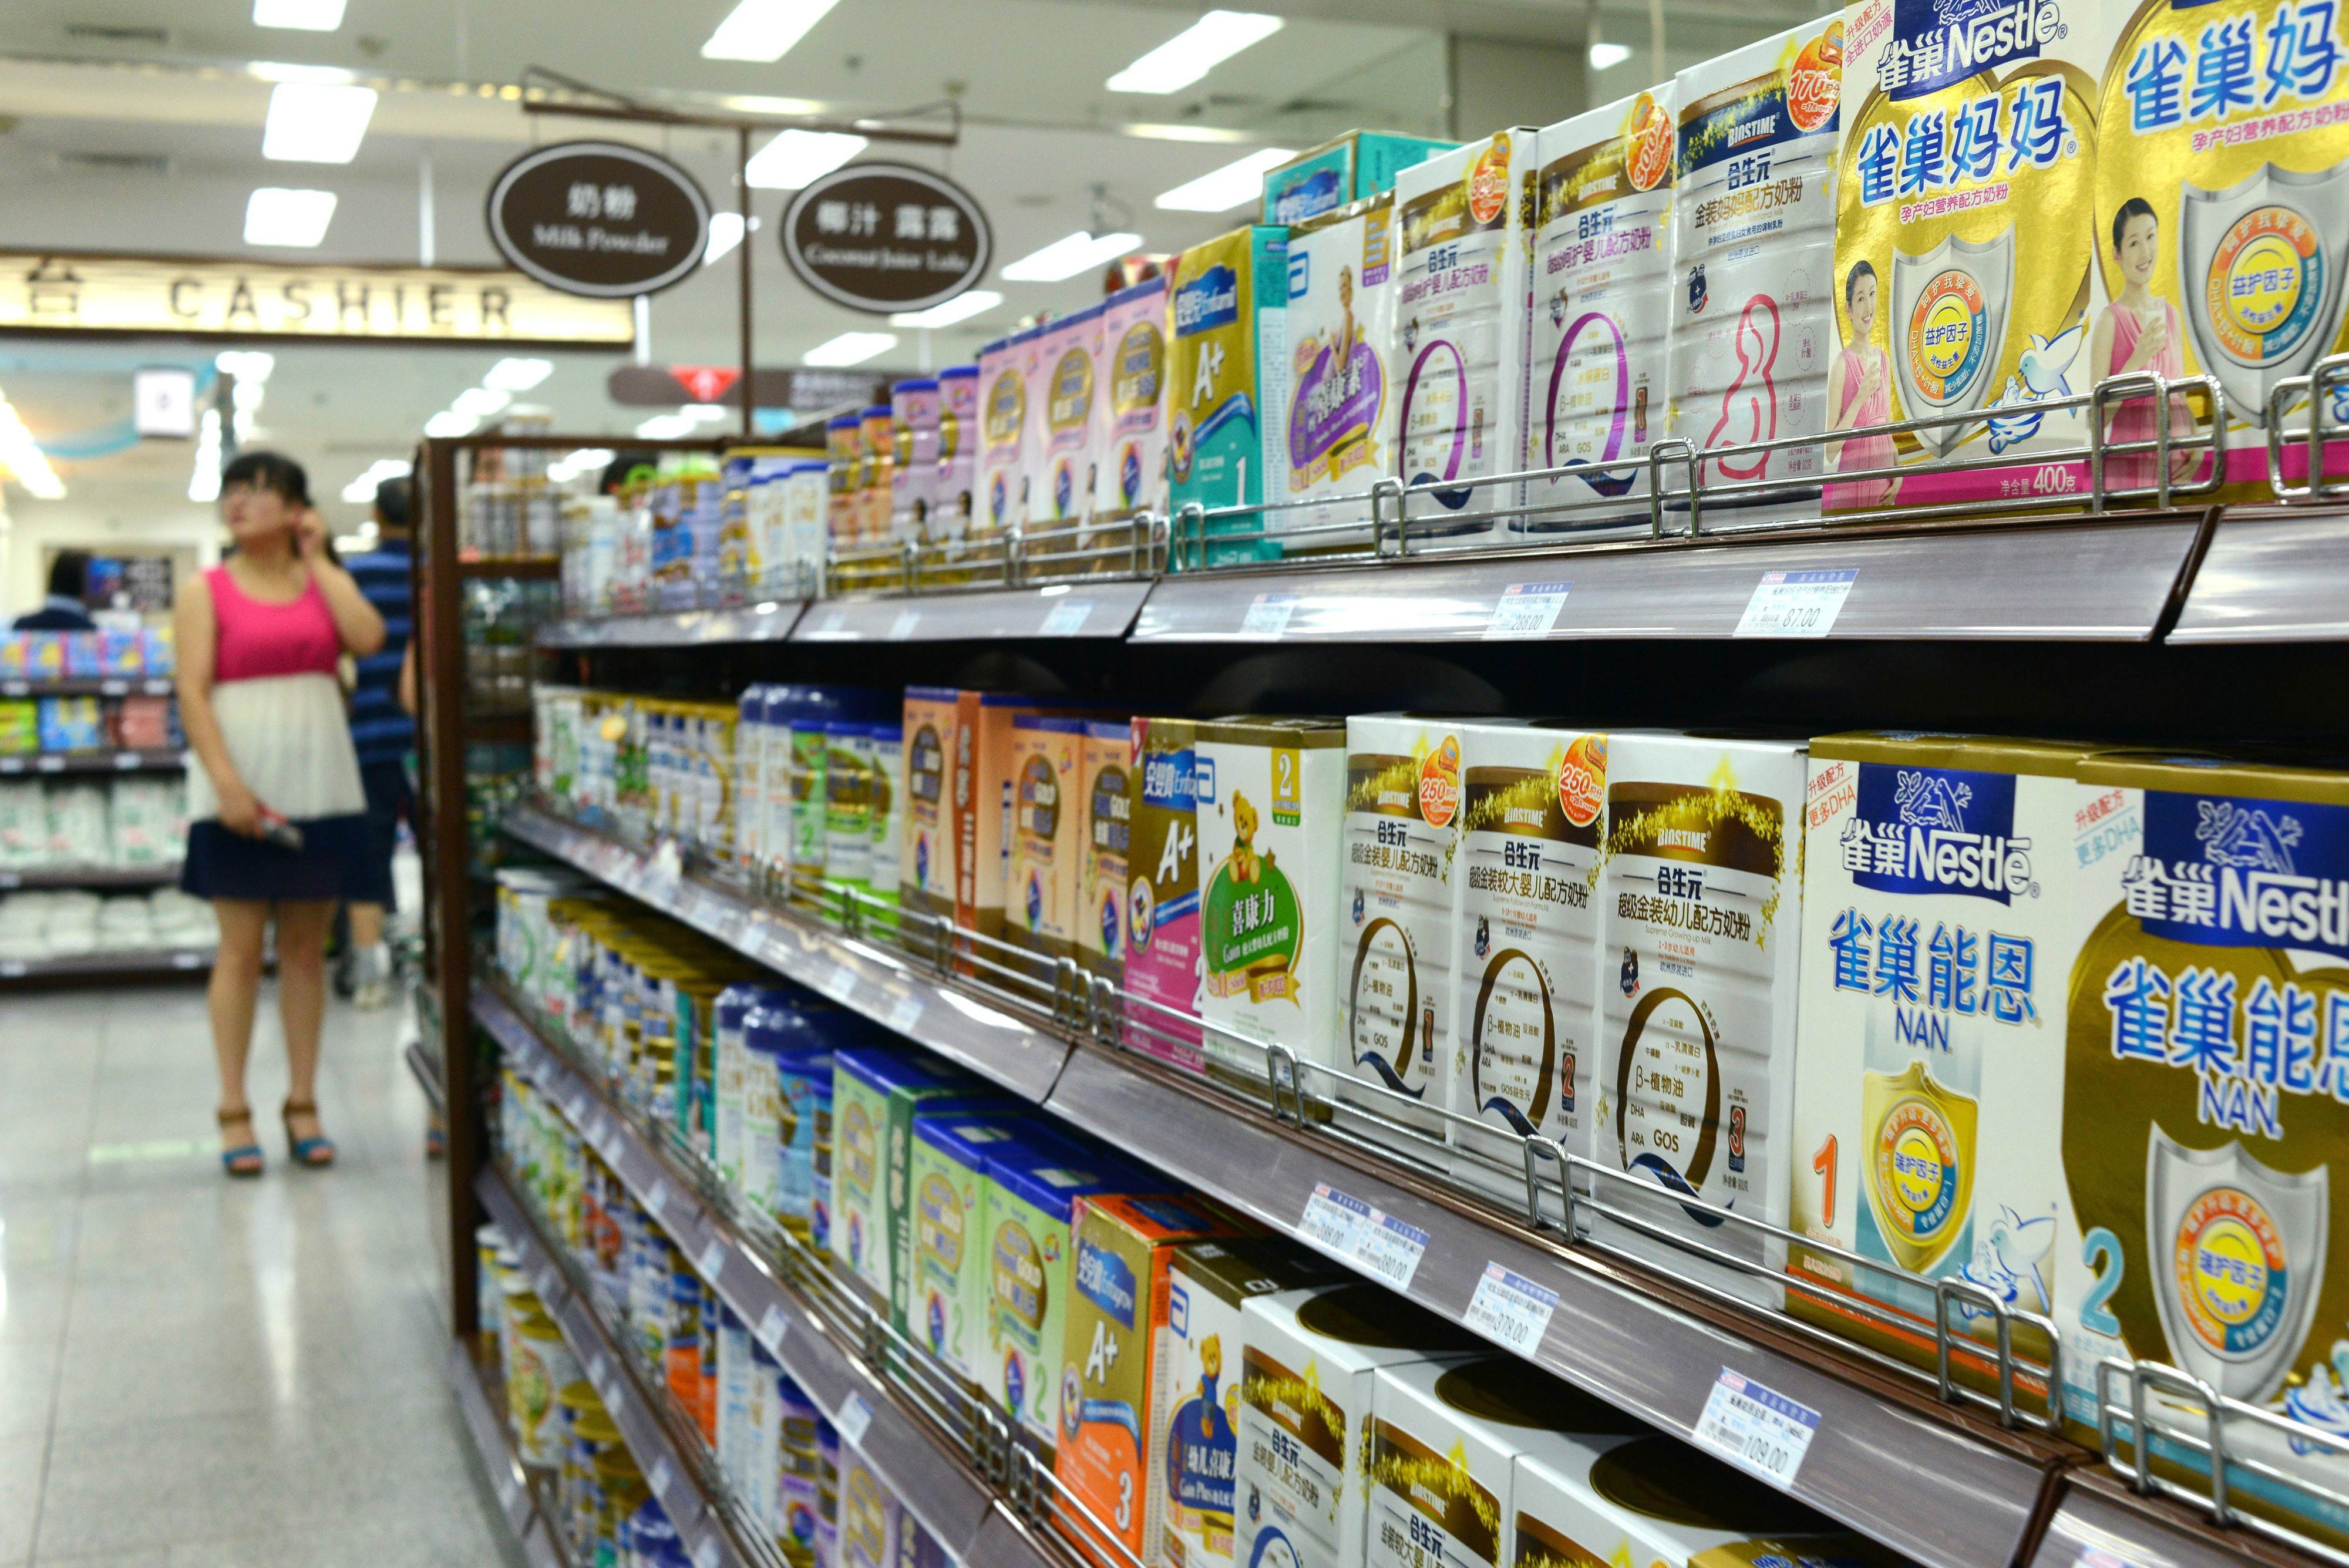 Shelves of milk powder at a supermarket in Beijing in July 2013, amid an investigation into alleged price-fixing by foreign firms in the infant formula sector. Photo: AFP